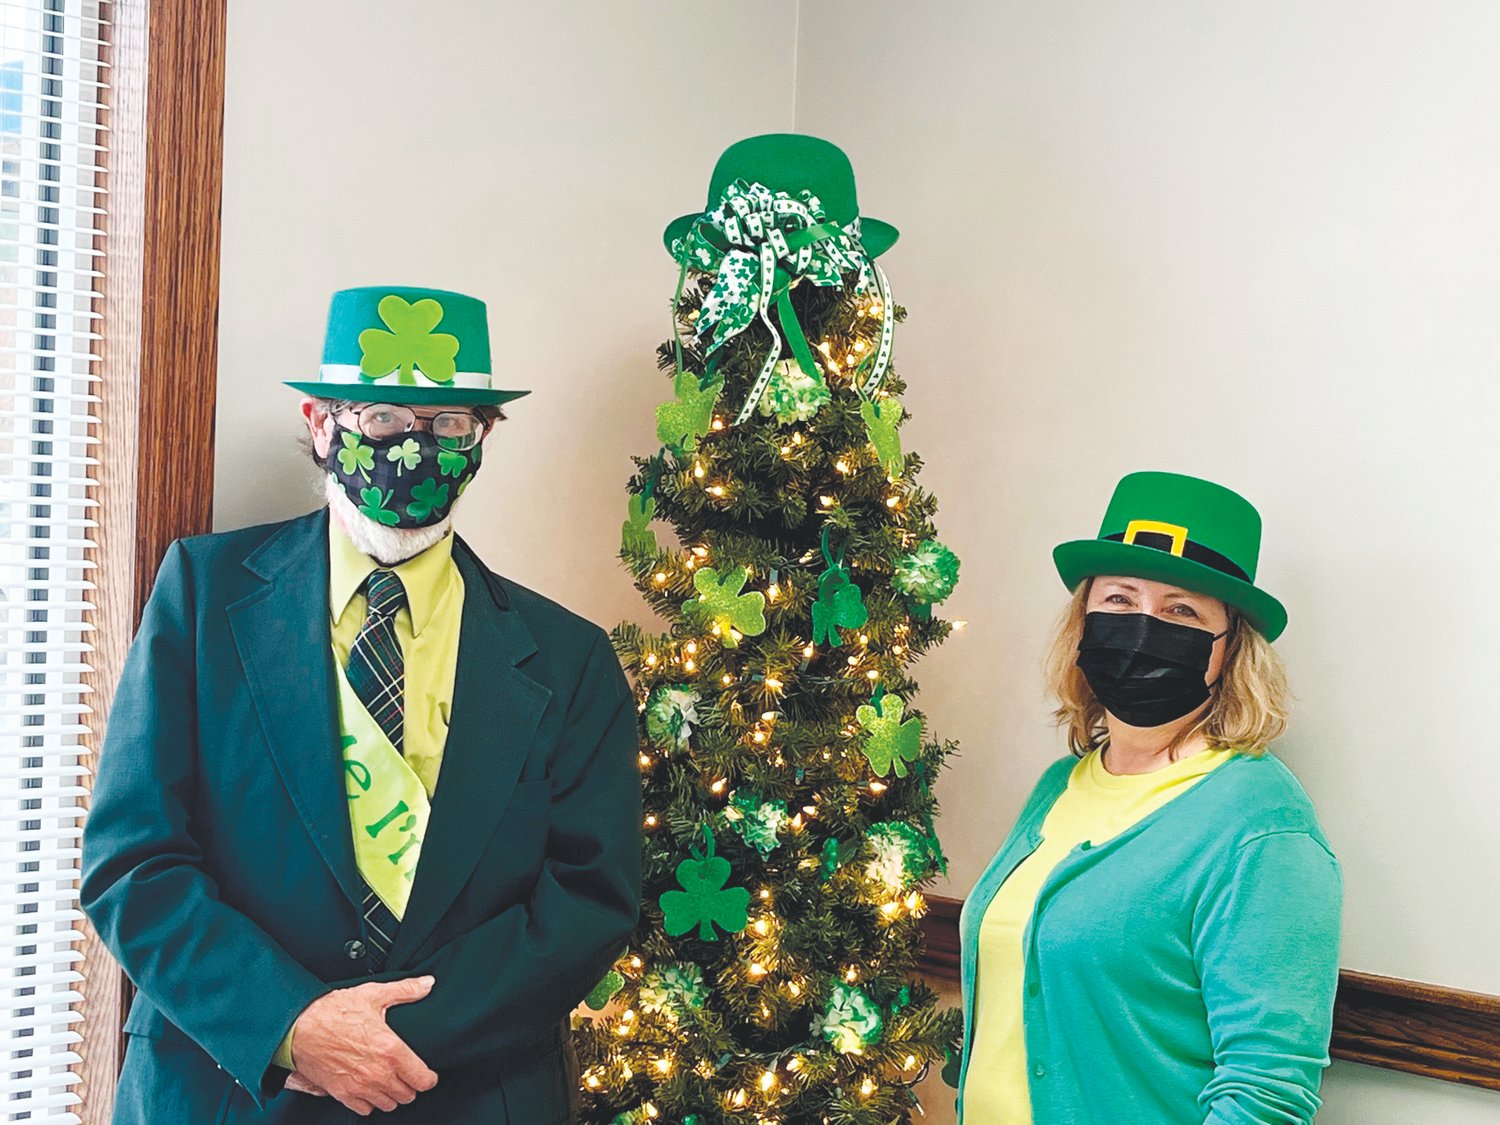 Bill Widman, left, poses with Eastern Chatham Senior Center manager Liz Lahti during the Council on Aging’s Saint Patrick’s Day celebration in Siler City in March.